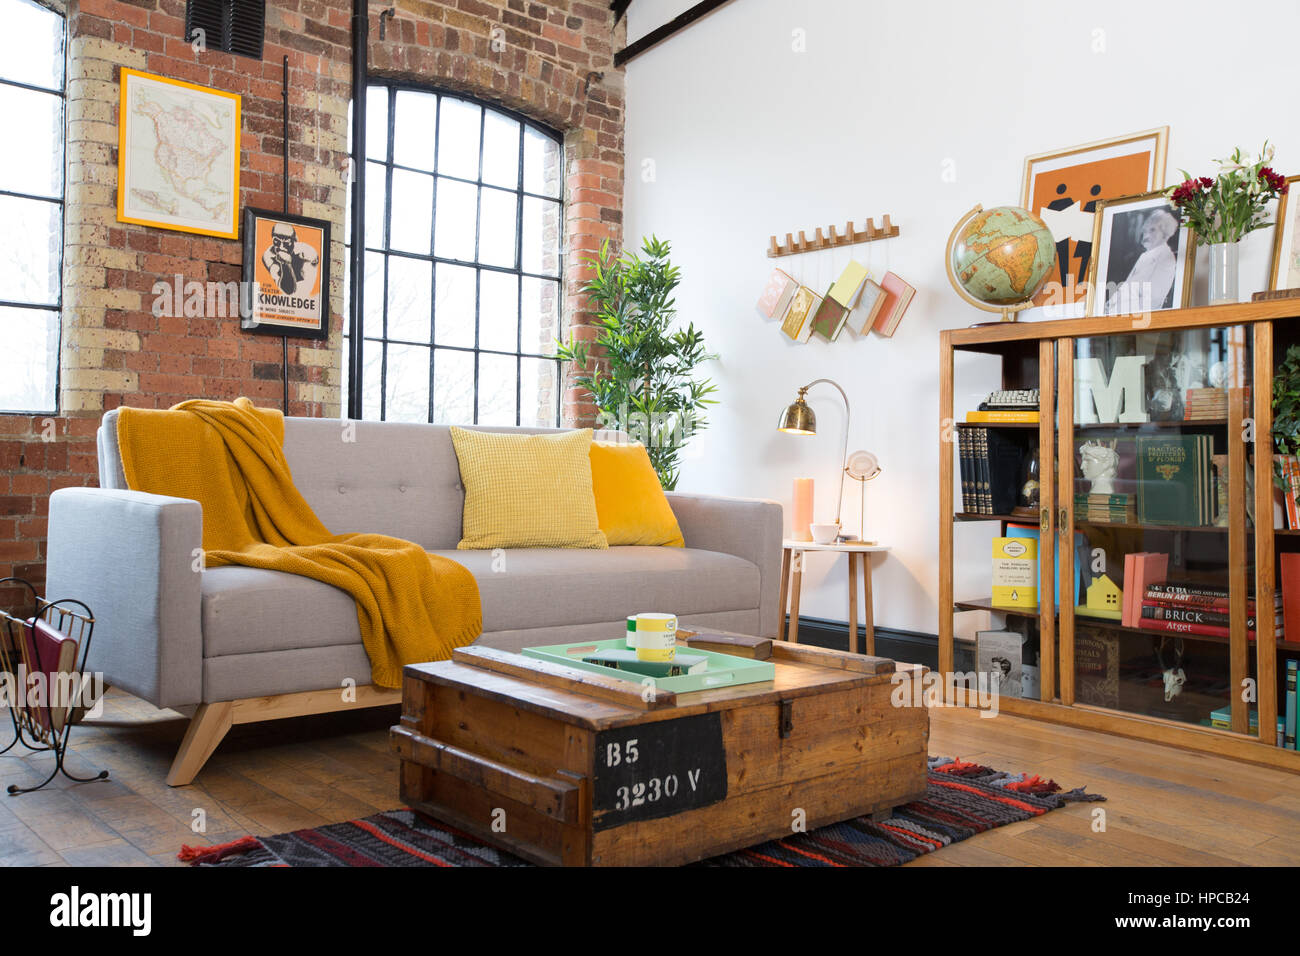 A living room with exposed brick walls and a grey Danish design sofa with yellow blanket and cushions Stock Photo